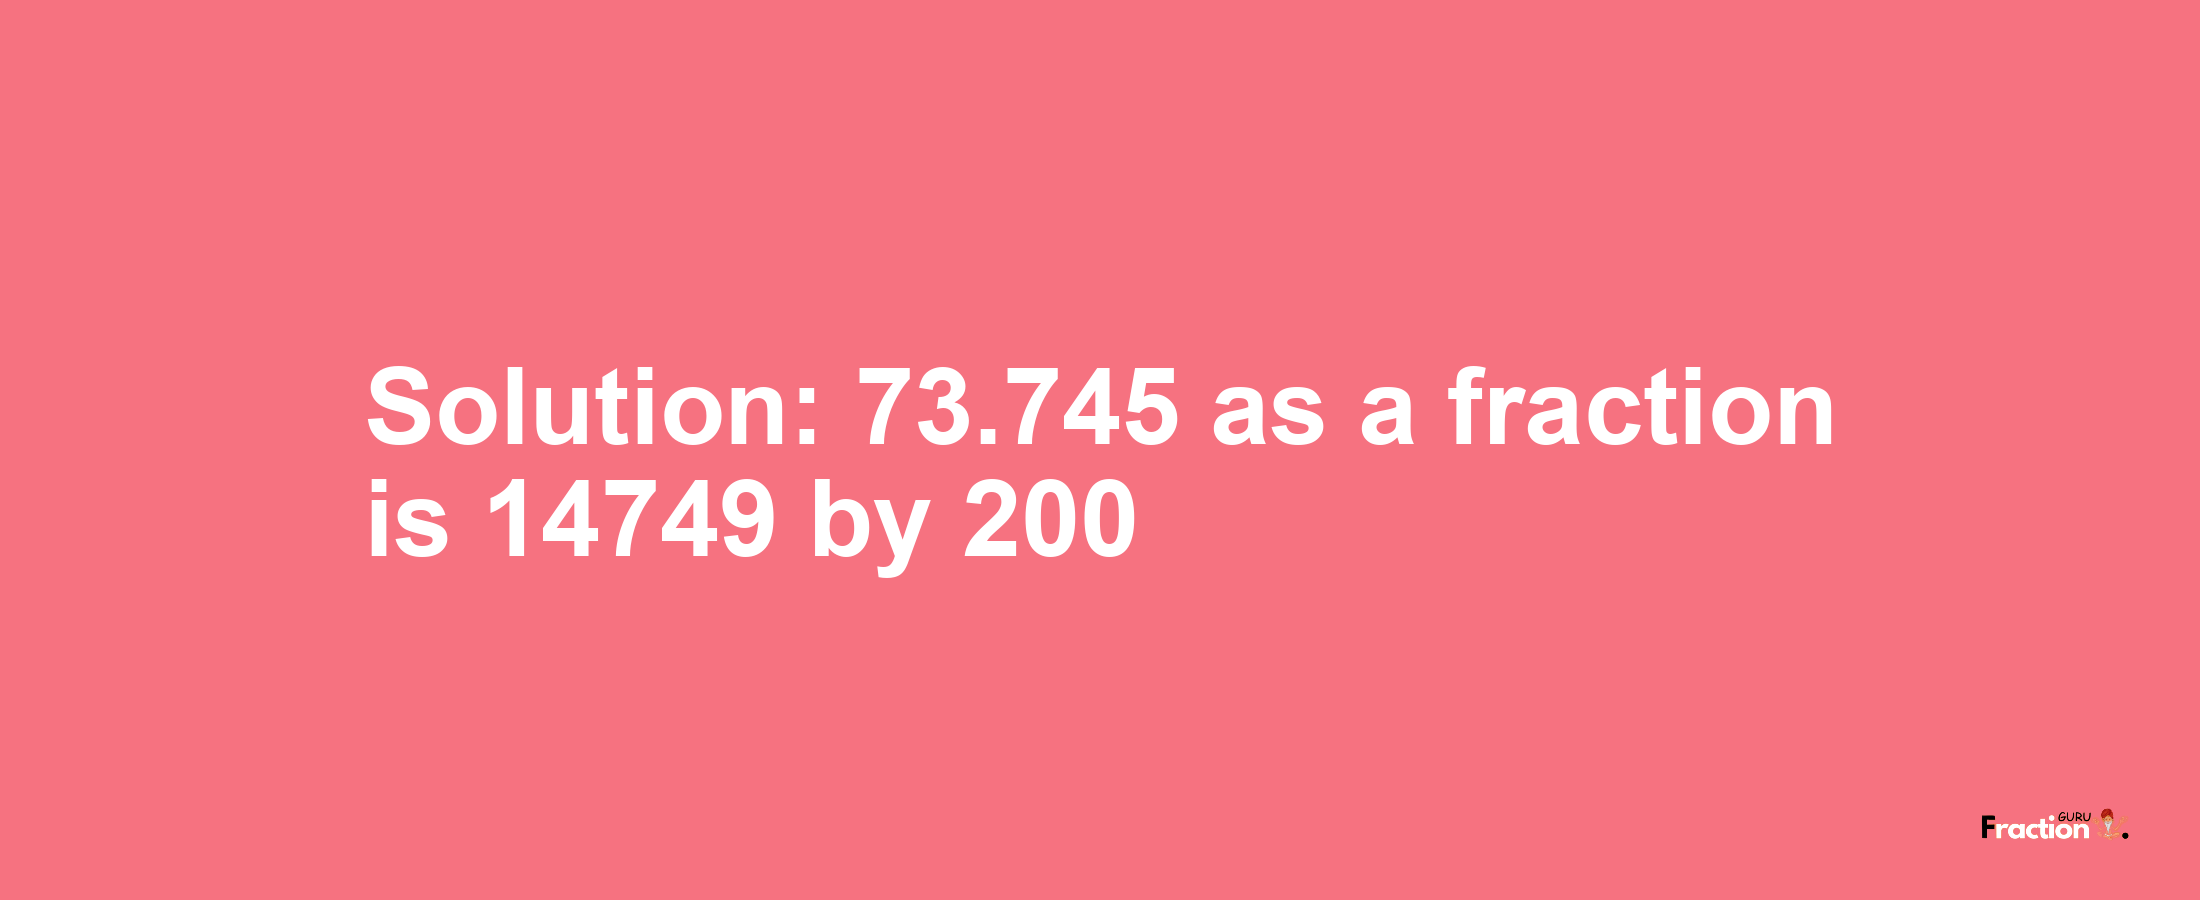 Solution:73.745 as a fraction is 14749/200